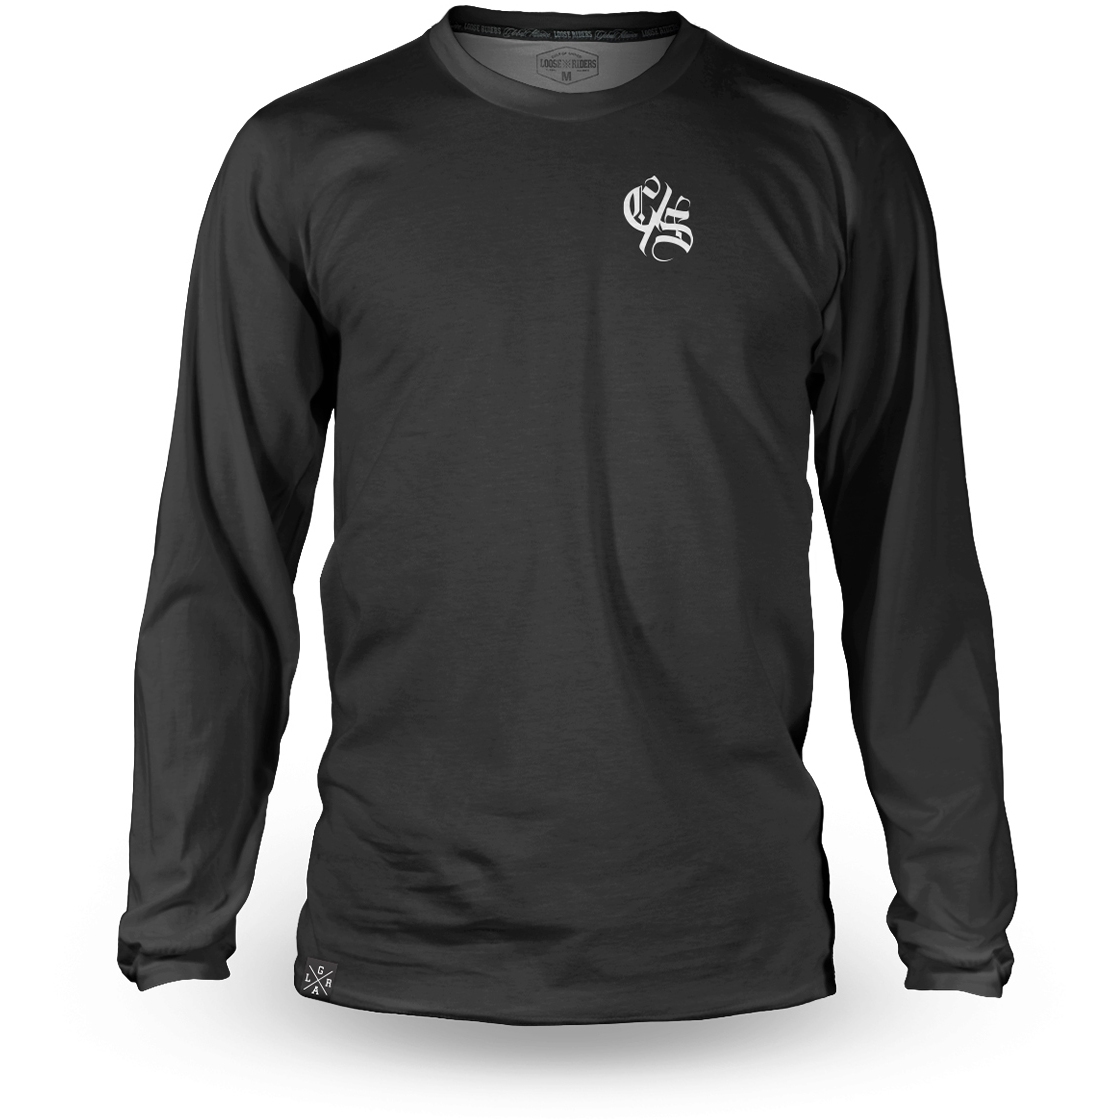 Image of Loose Riders Technical Long Sleeve Jersey - The Cult of Shred